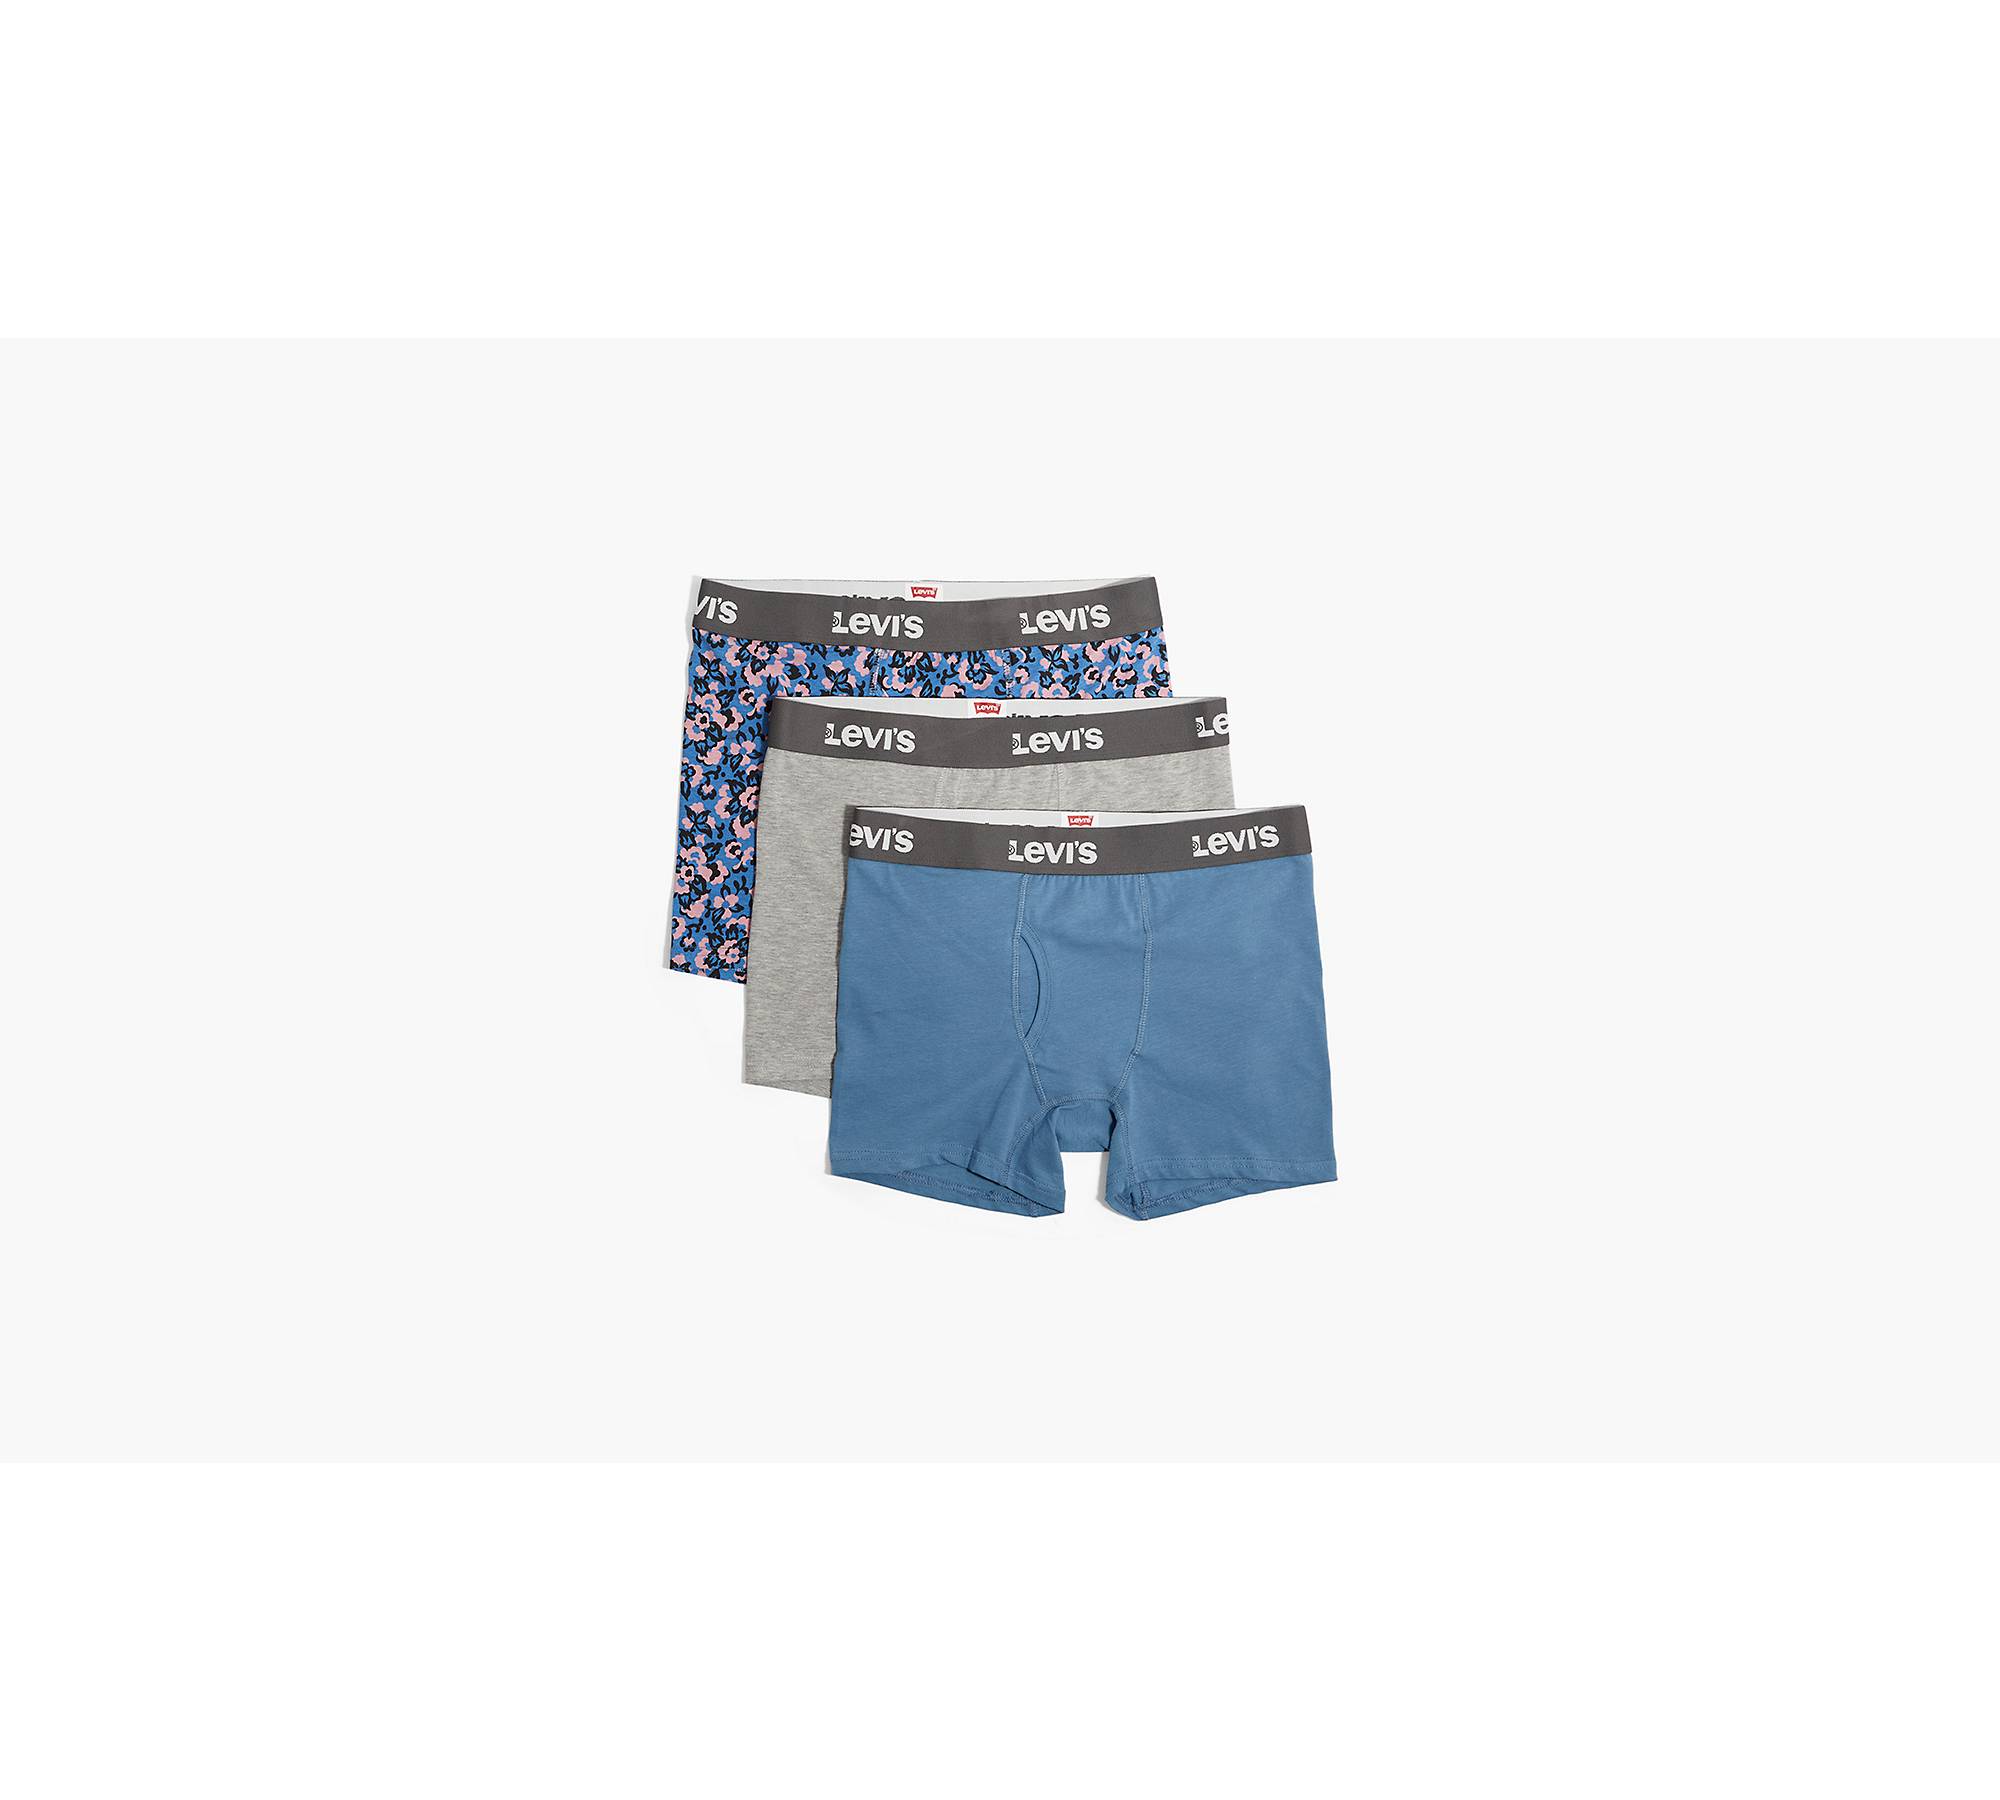 Alfred Floral Boxer Briefs (3 Pack) - Multi-color